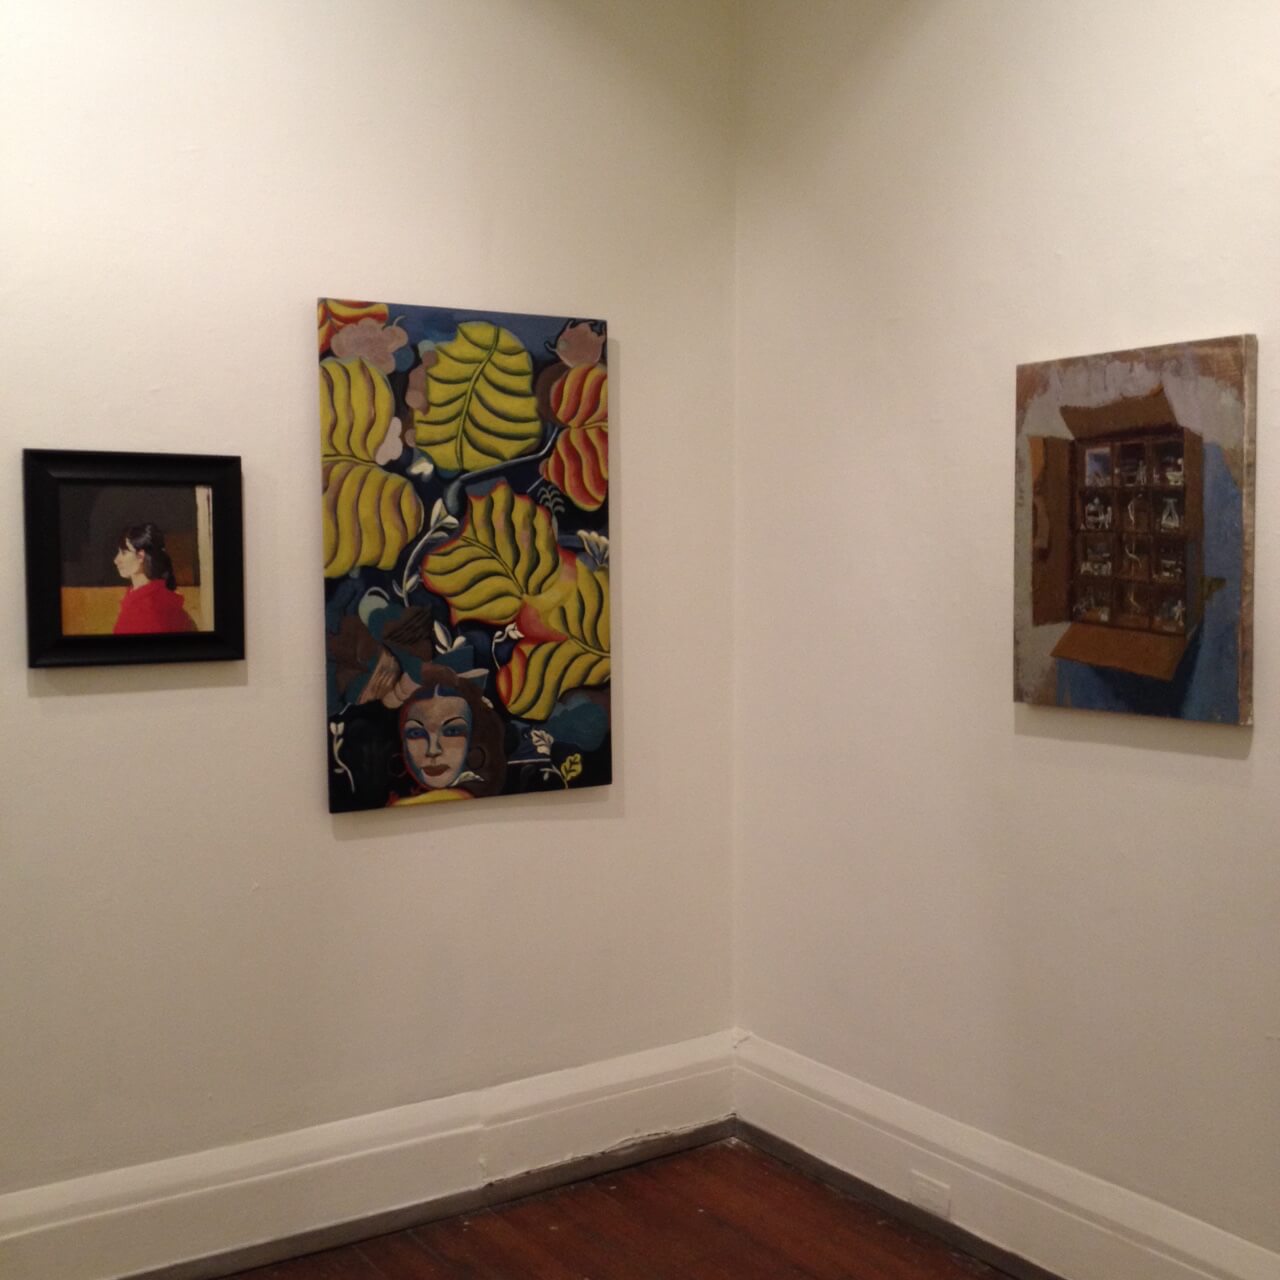 Left to right: Works by Avital Burg, Gary Nichols and Avital Burg in the room curated by Yevgeniya Baras.